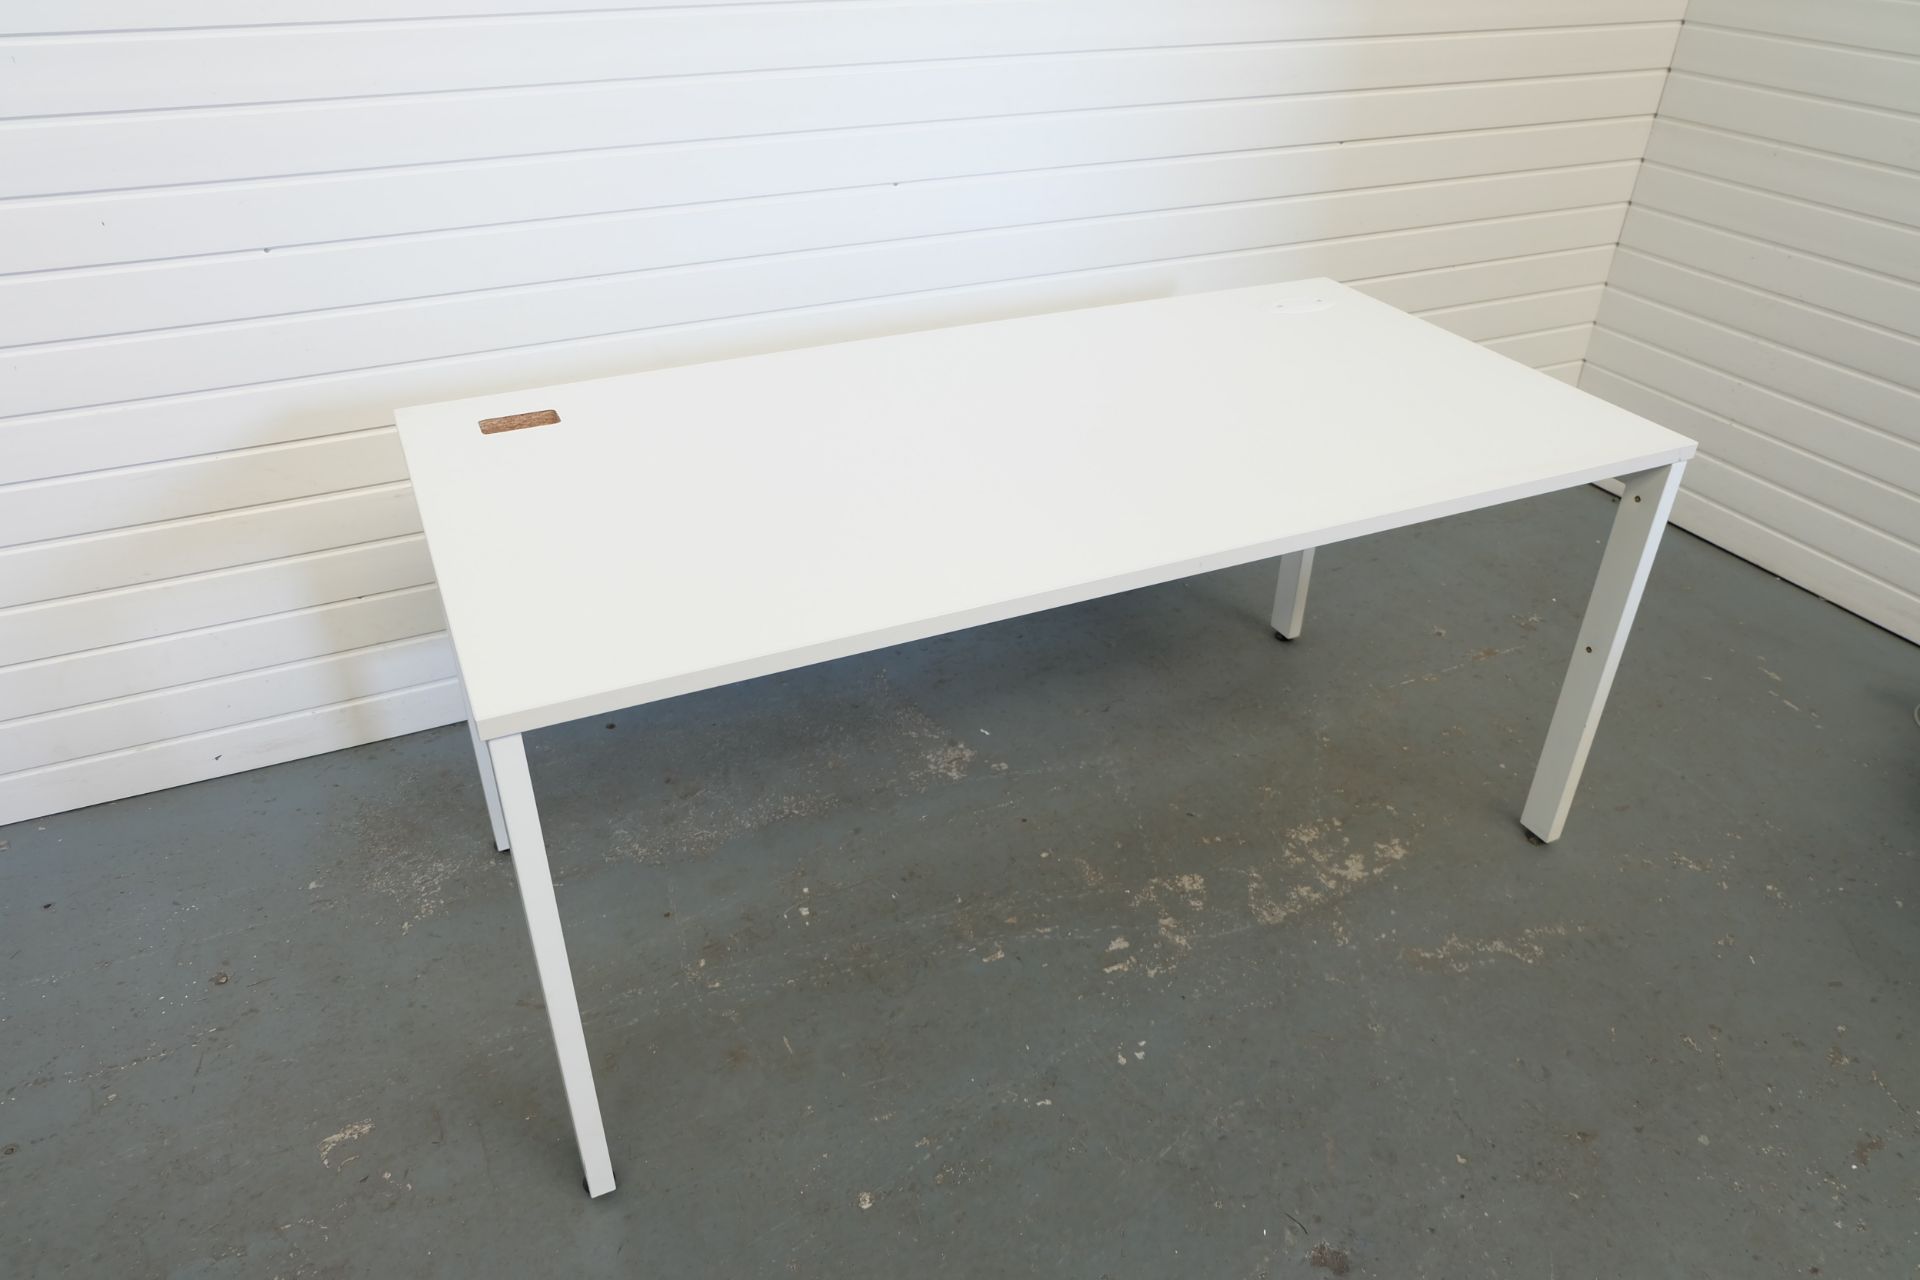 White Desk With Metal Legs and Adjustable Feet. 2 x Holes for Wires. Size 1600mm x 800mm x 730mm Hig - Image 2 of 4